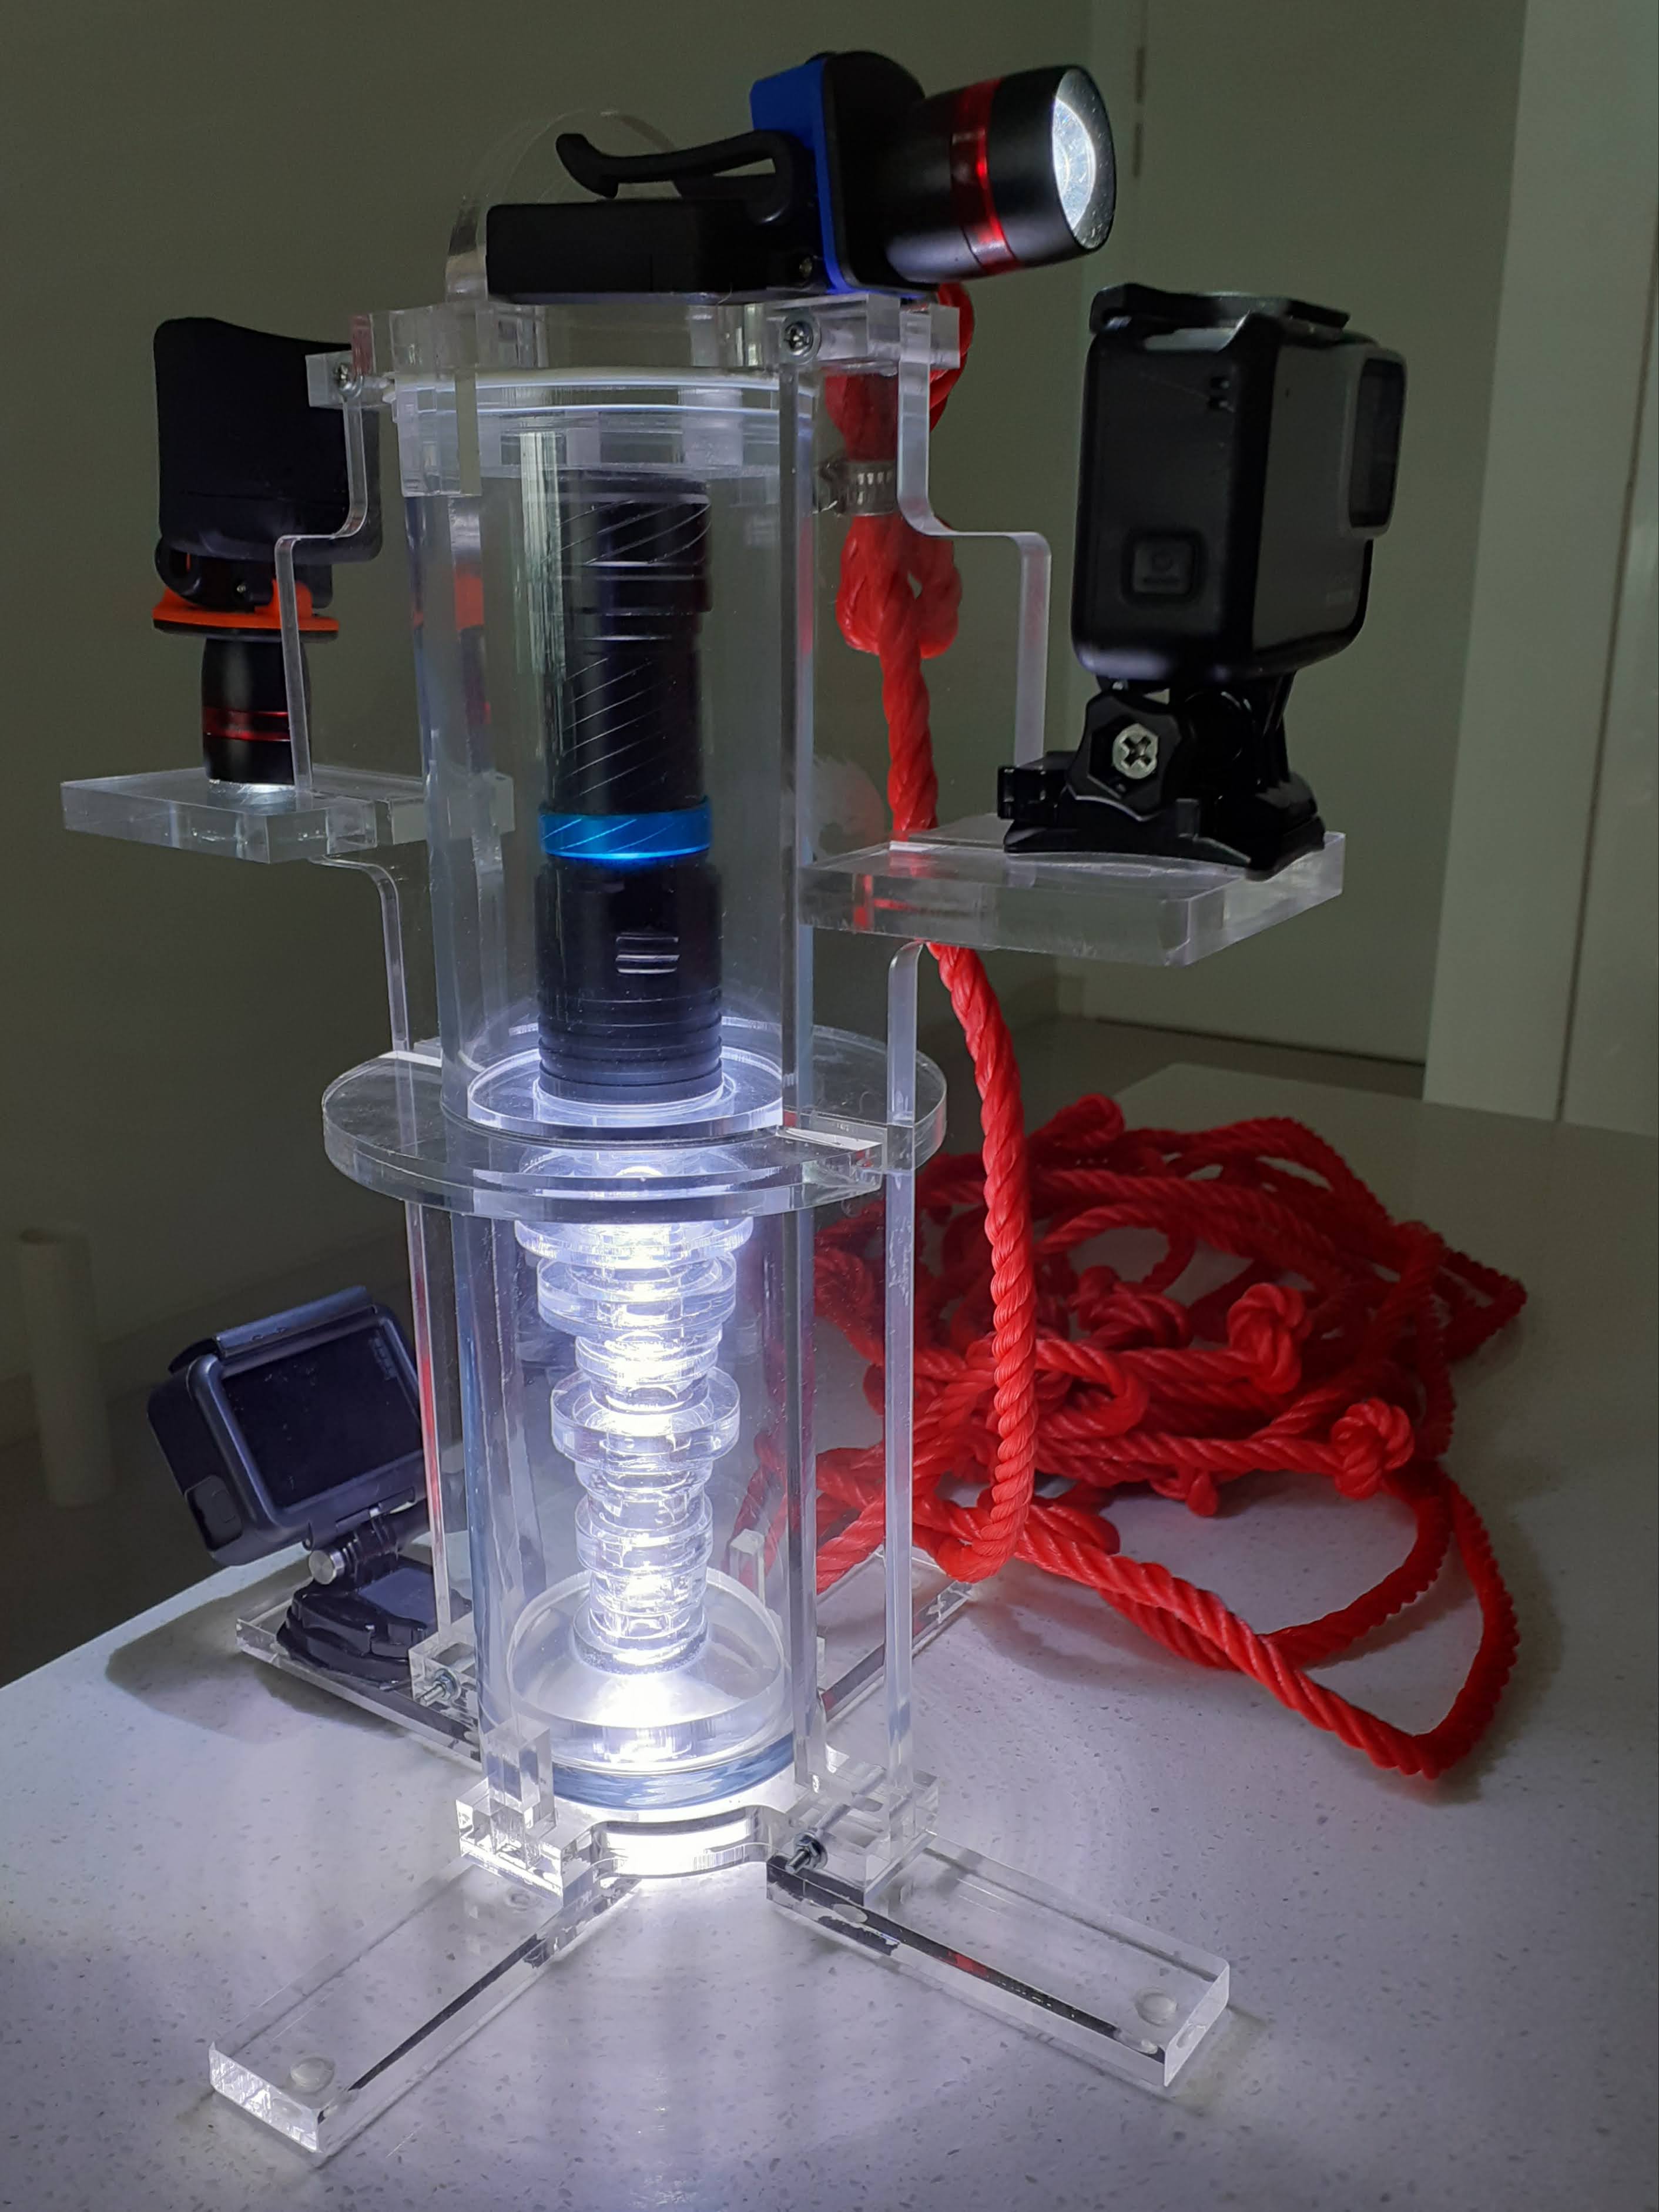 An Introduction of the Underwater Observatory MAR-70 for monitoring water pollution levels